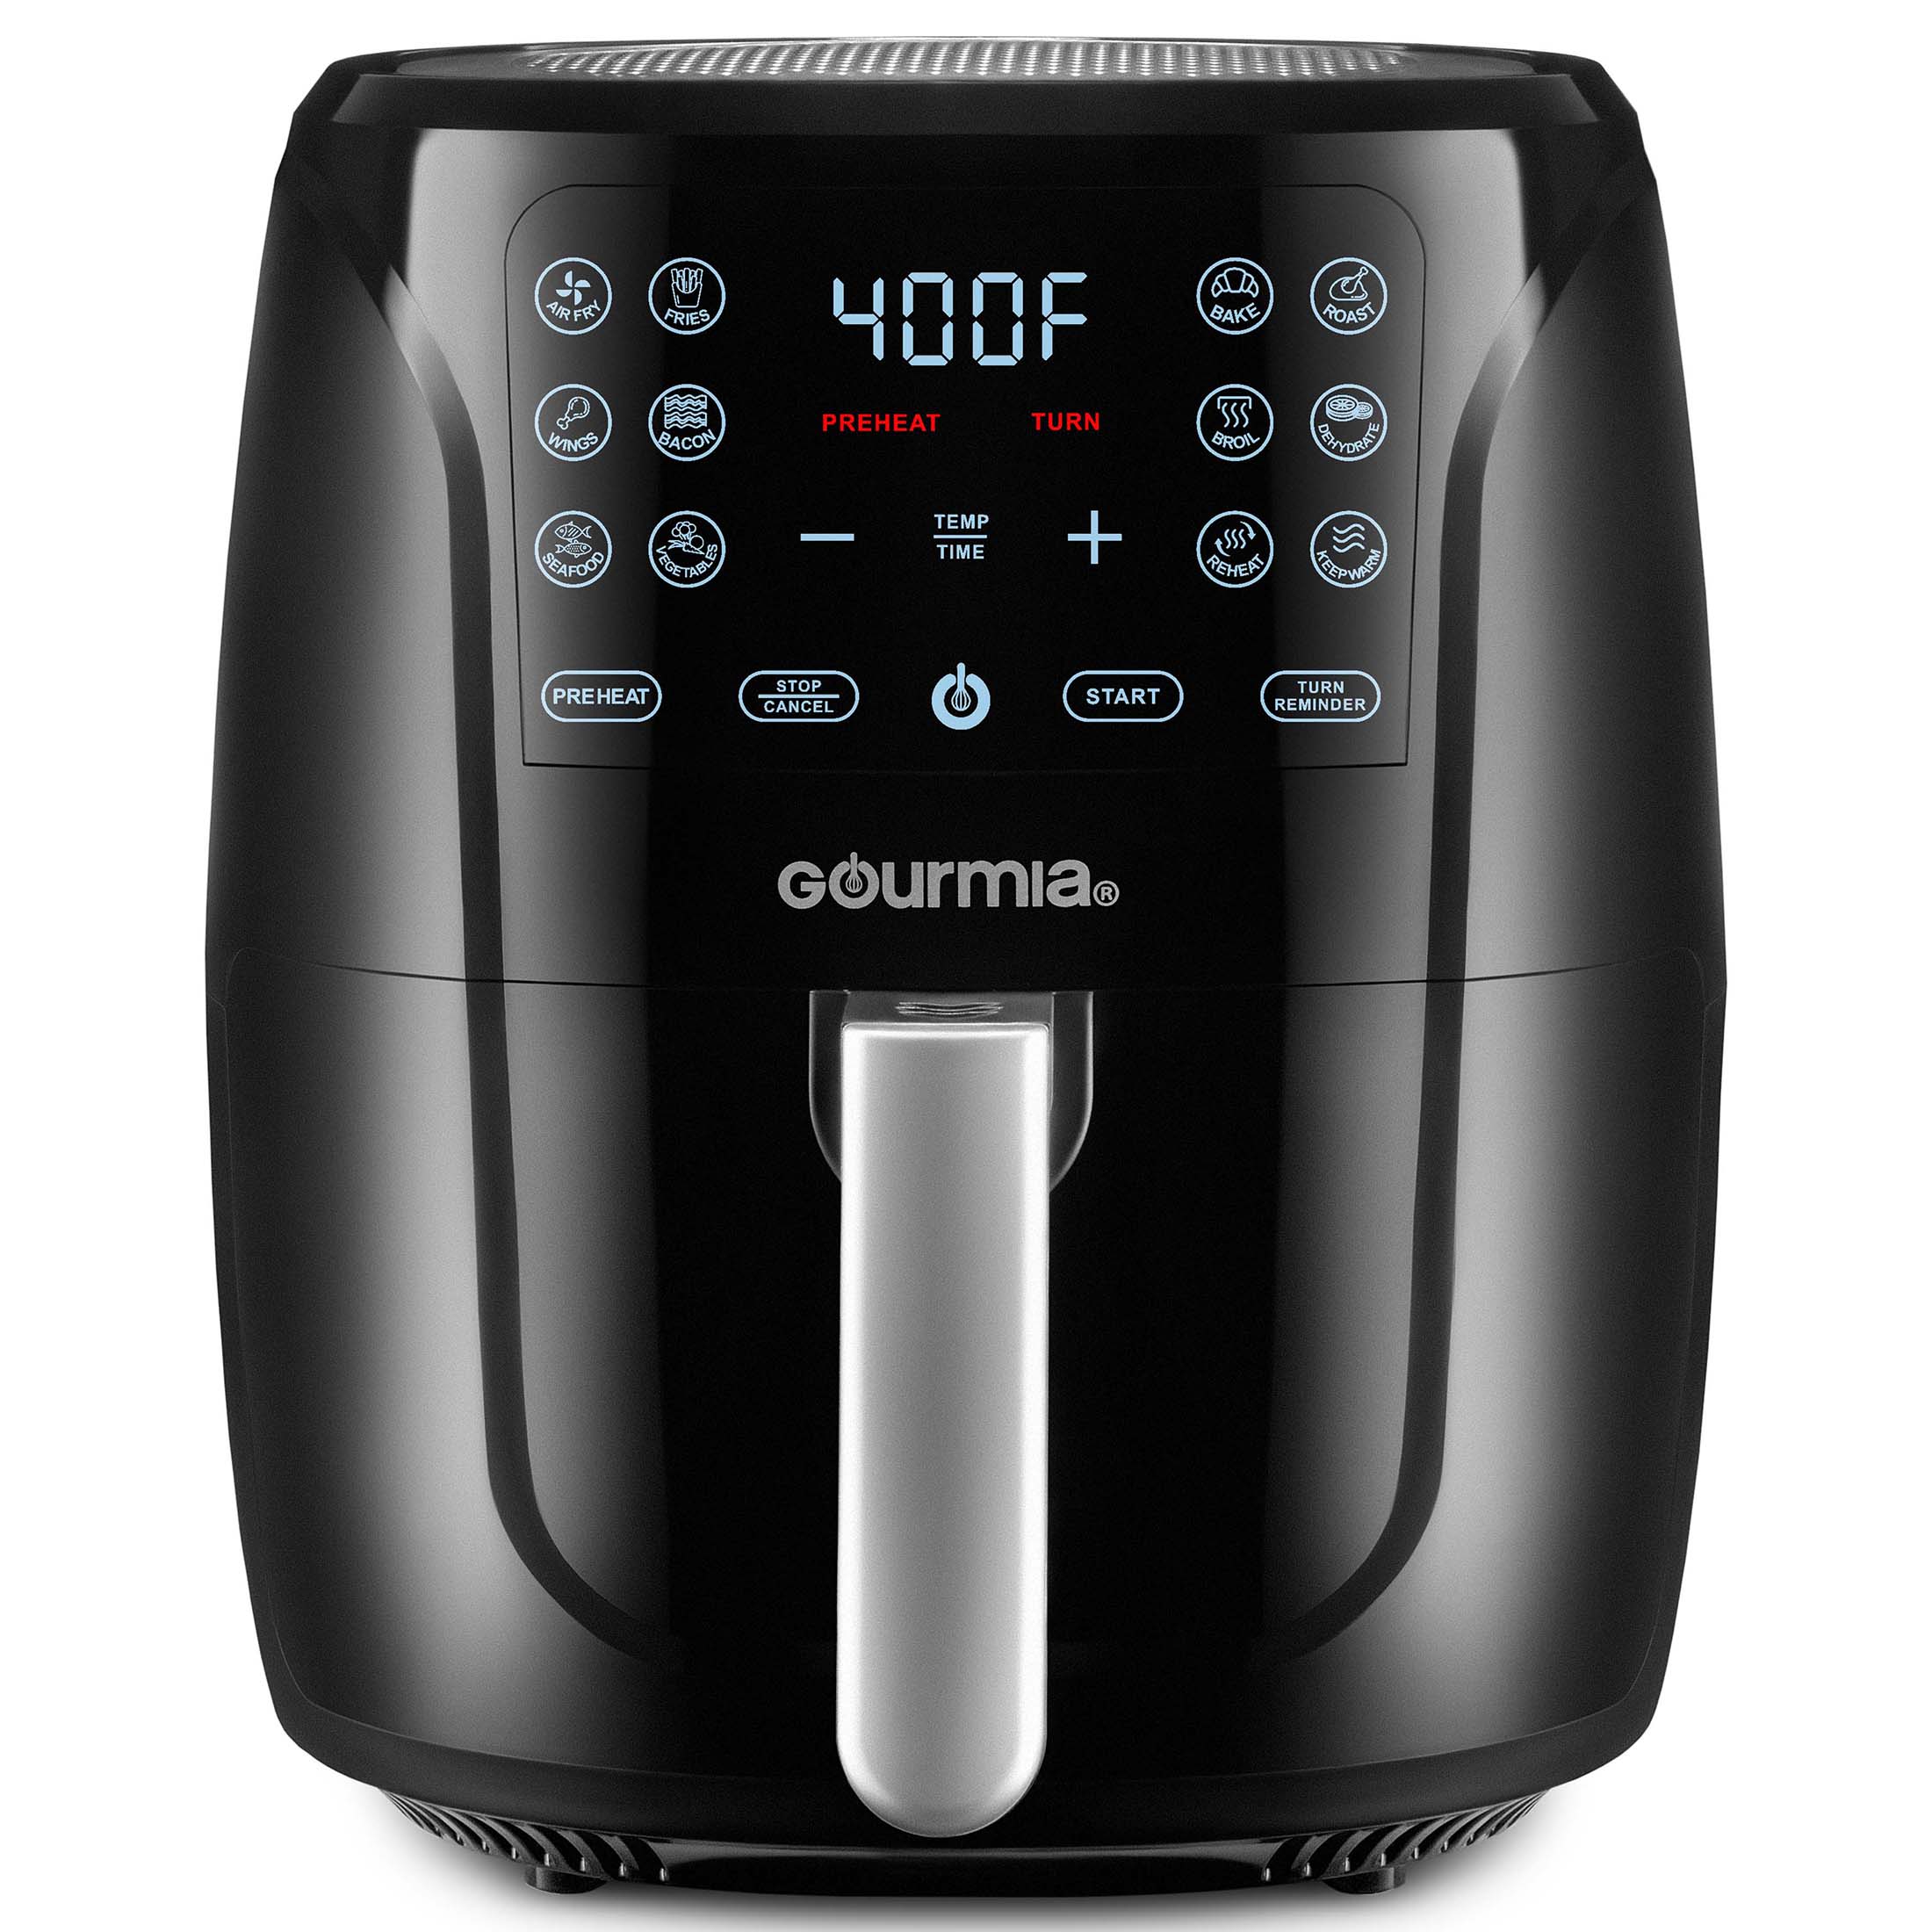 Gourmia 6-Qt Digital Air Fryer with Guided Cooking, Black GAF686, New, 13.2 H - image 1 of 8